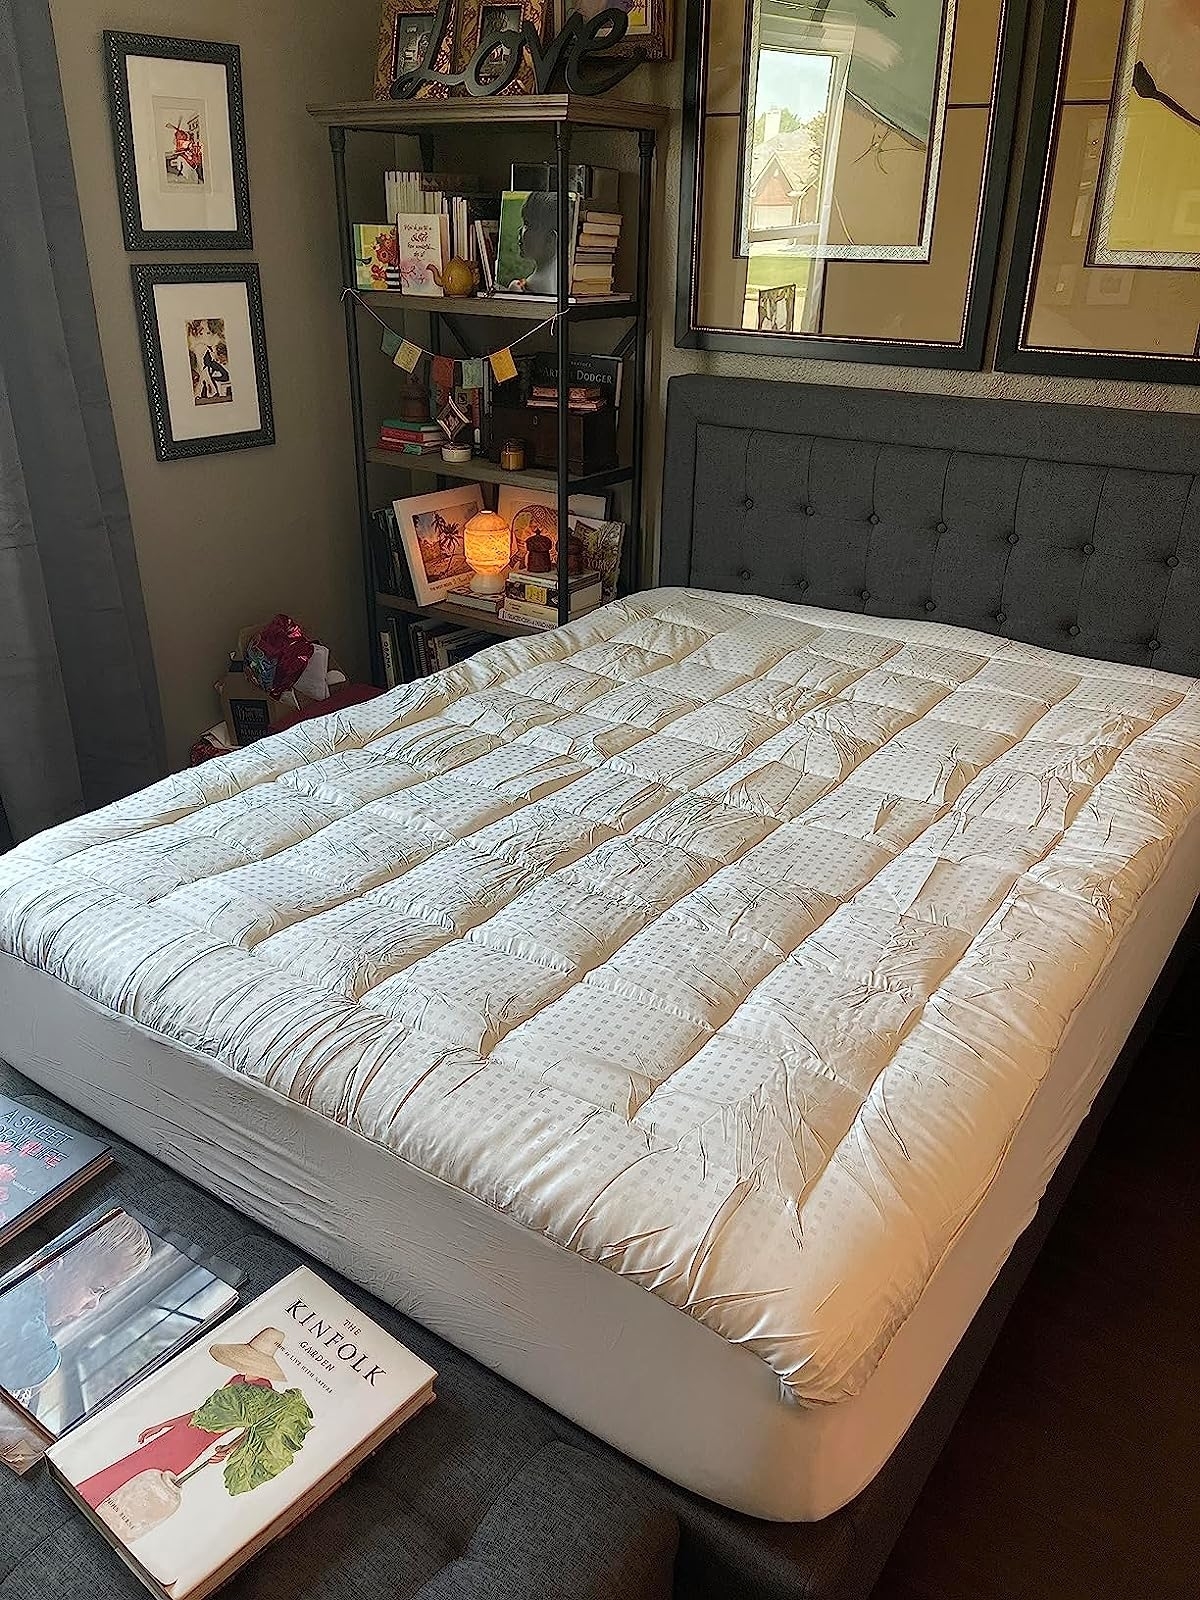 Reviewer image of the cover on their mattress